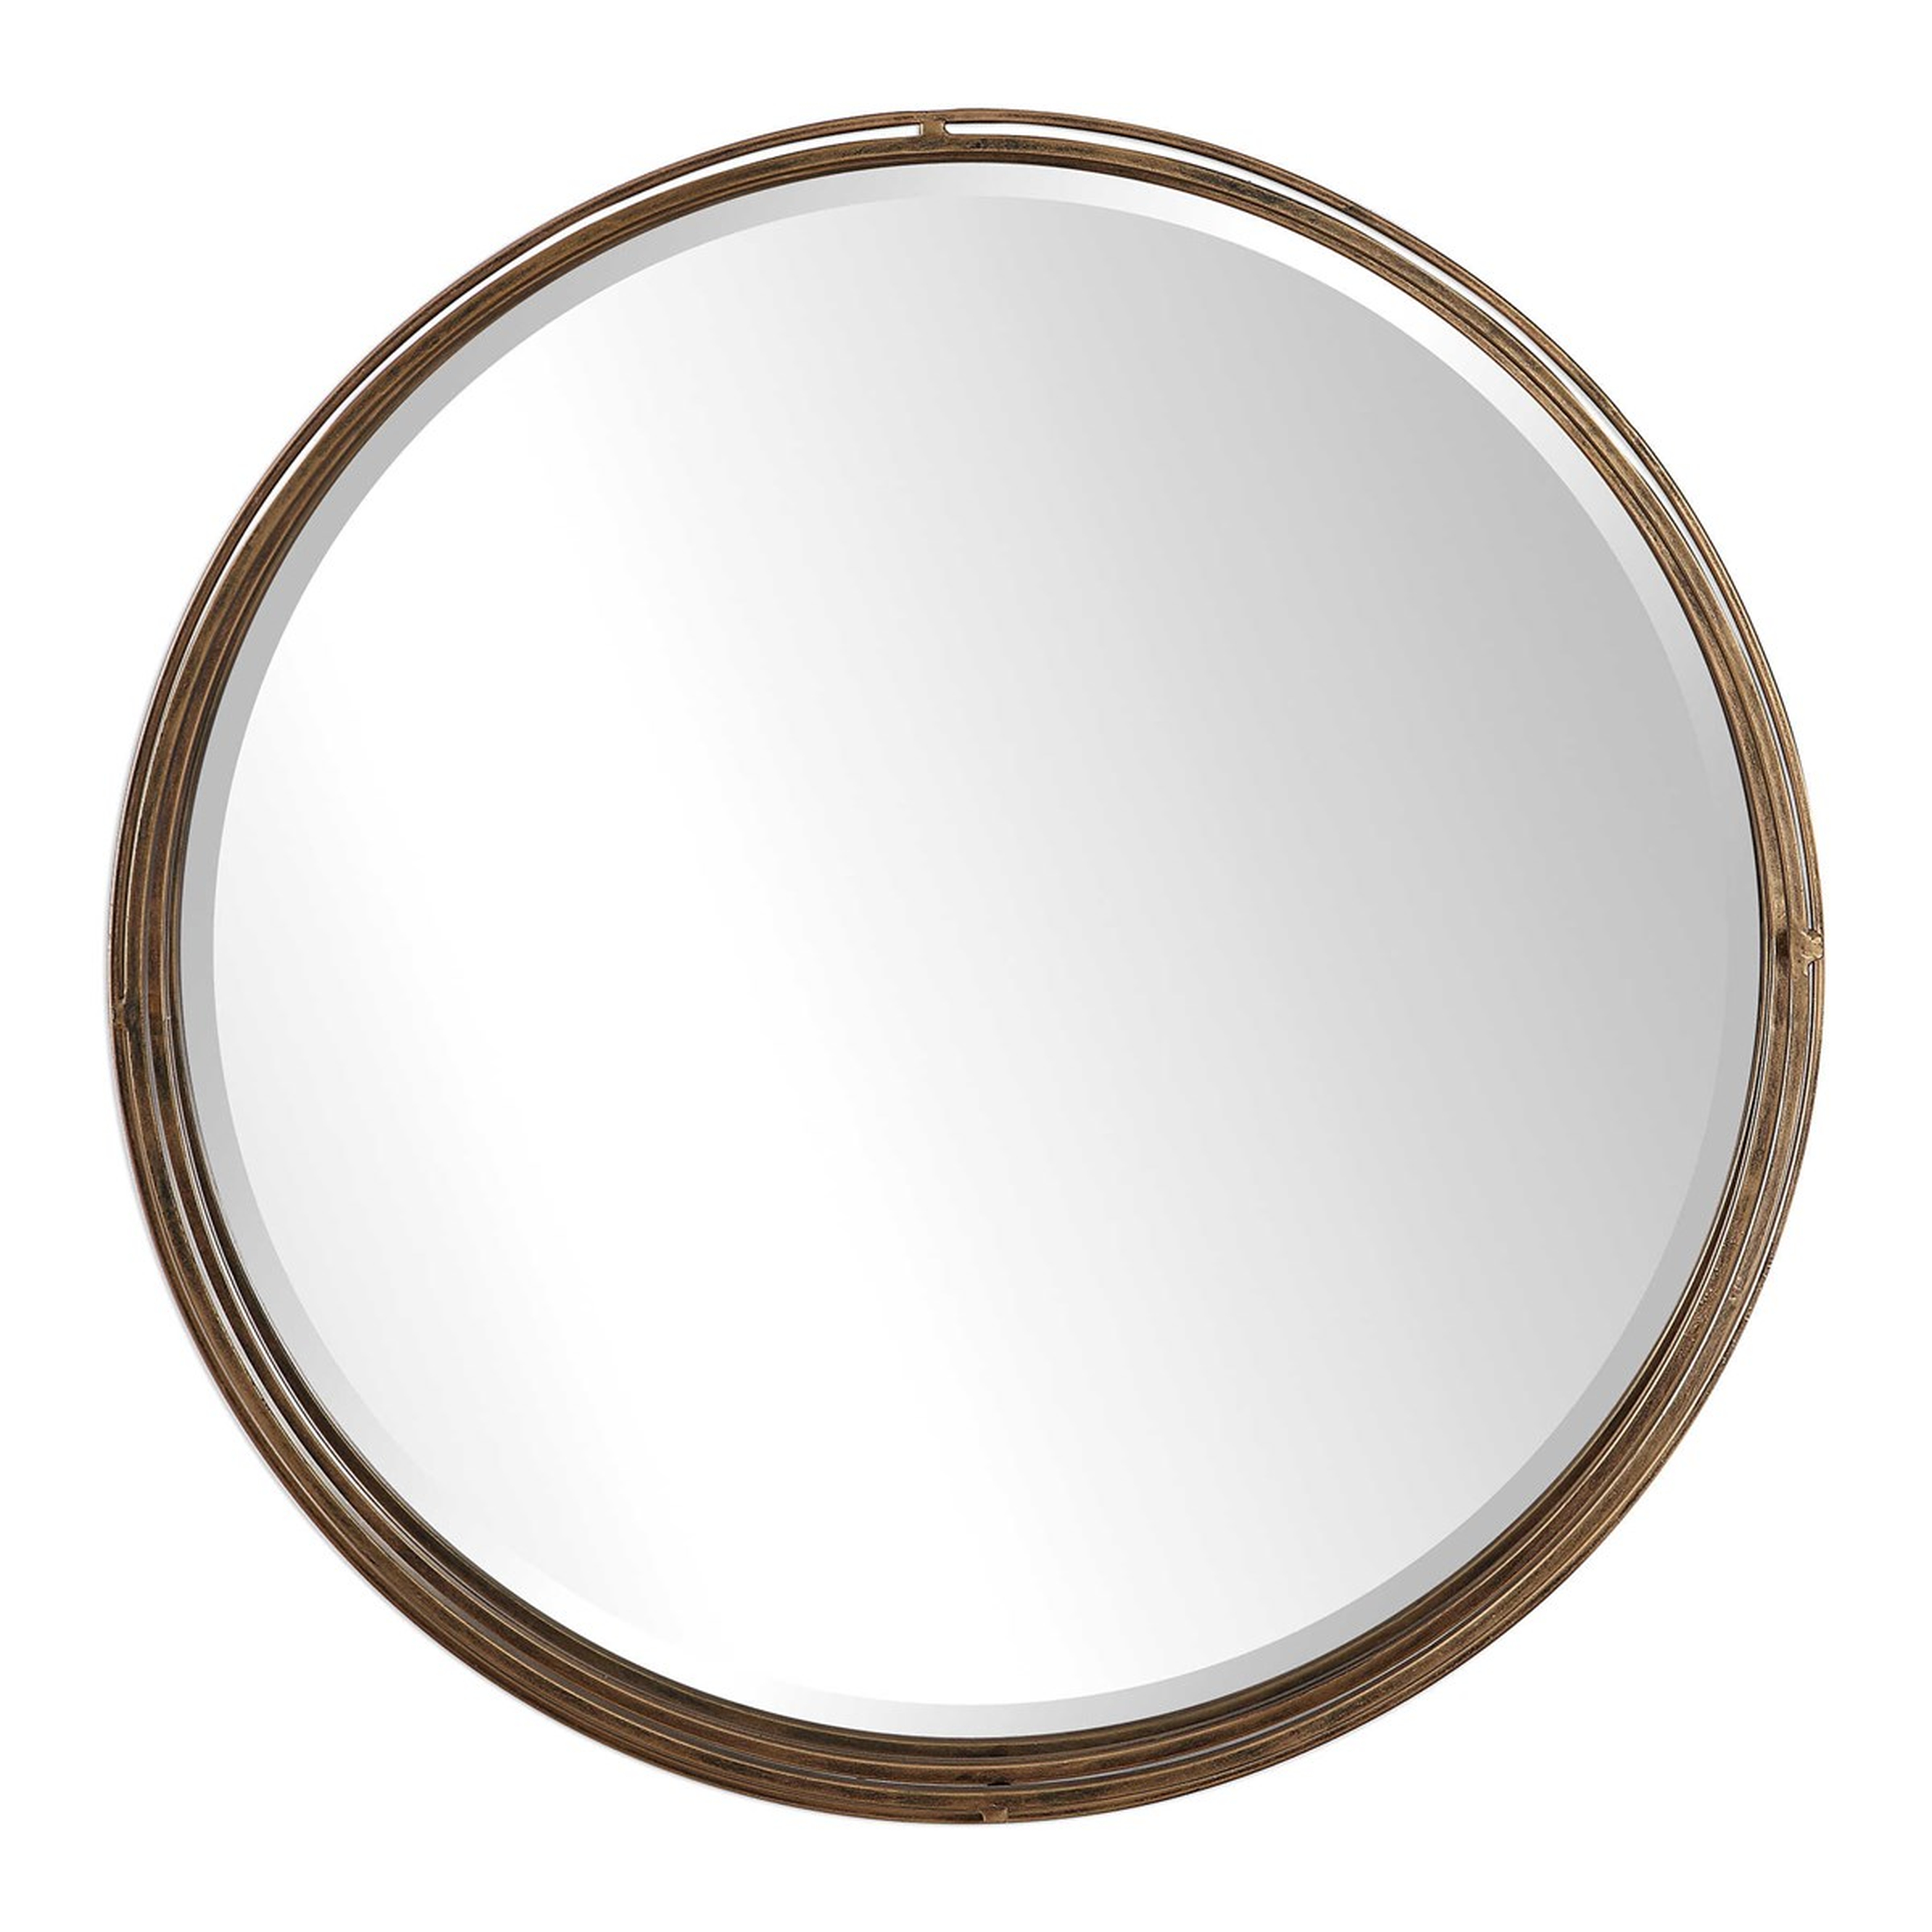 CANNON ROUND MIRROR - Hudsonhill Foundry